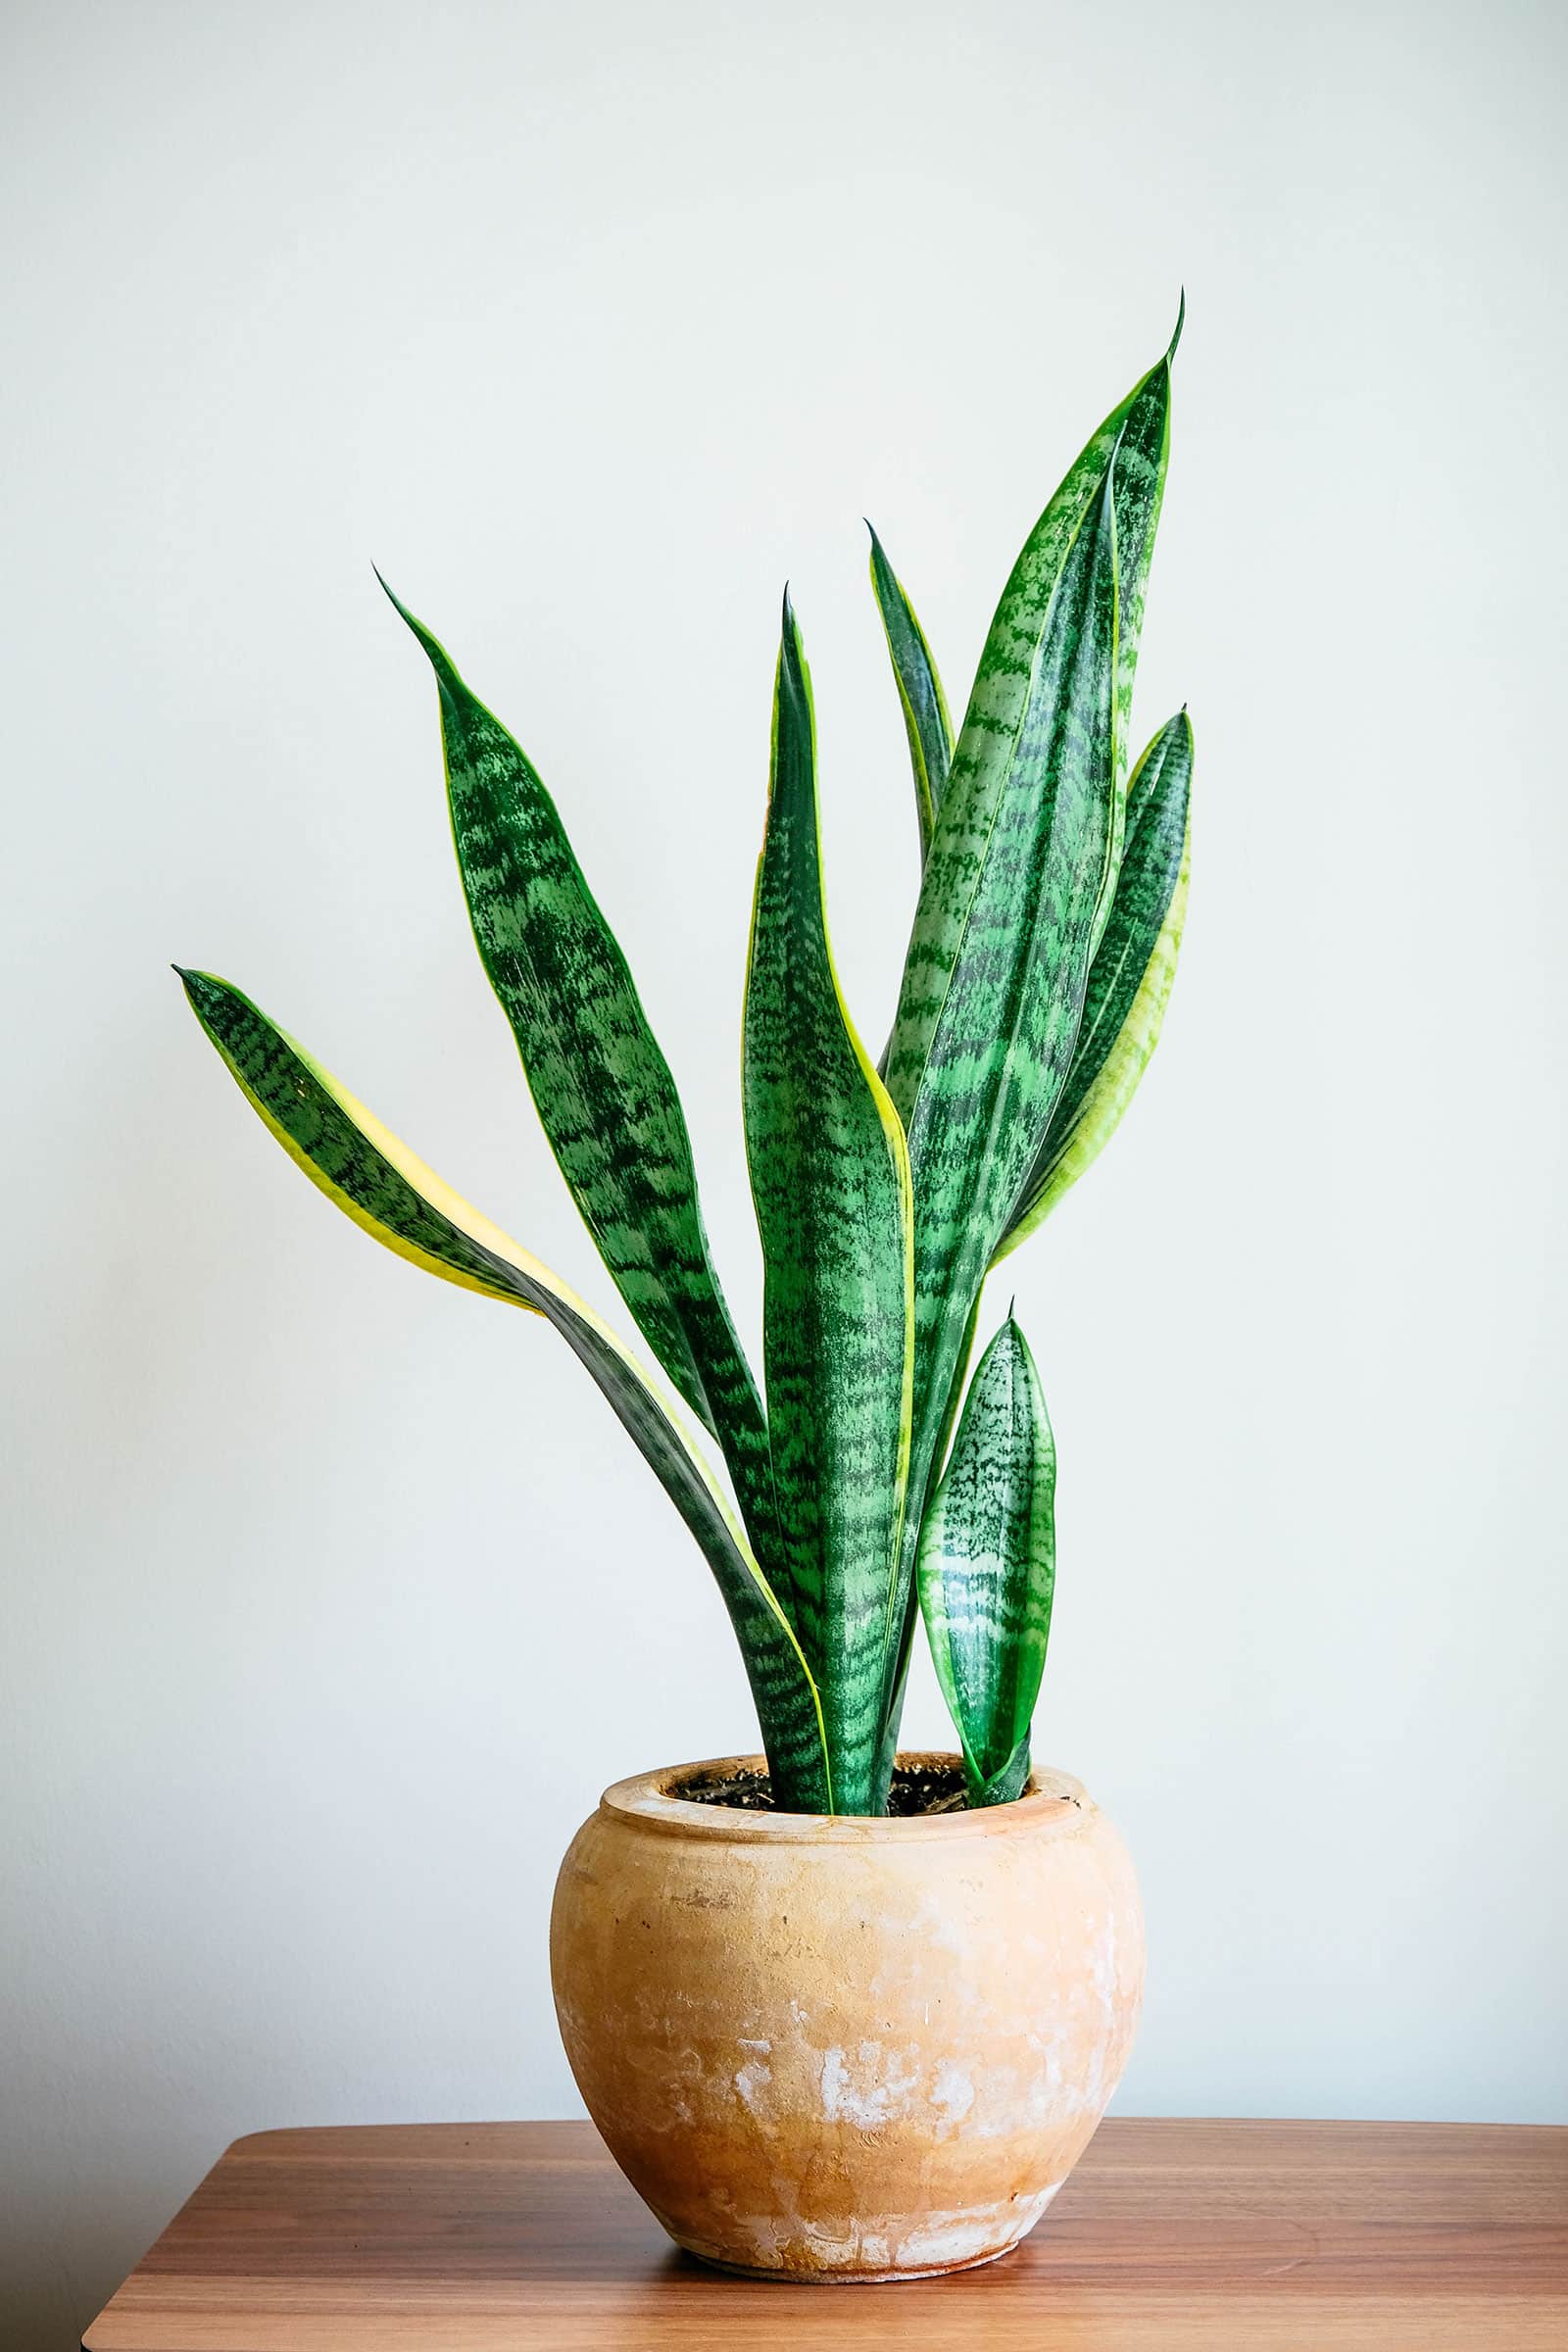 Sansevieria houseplant in a terracotta pot, shot on a wooden table against a white wall